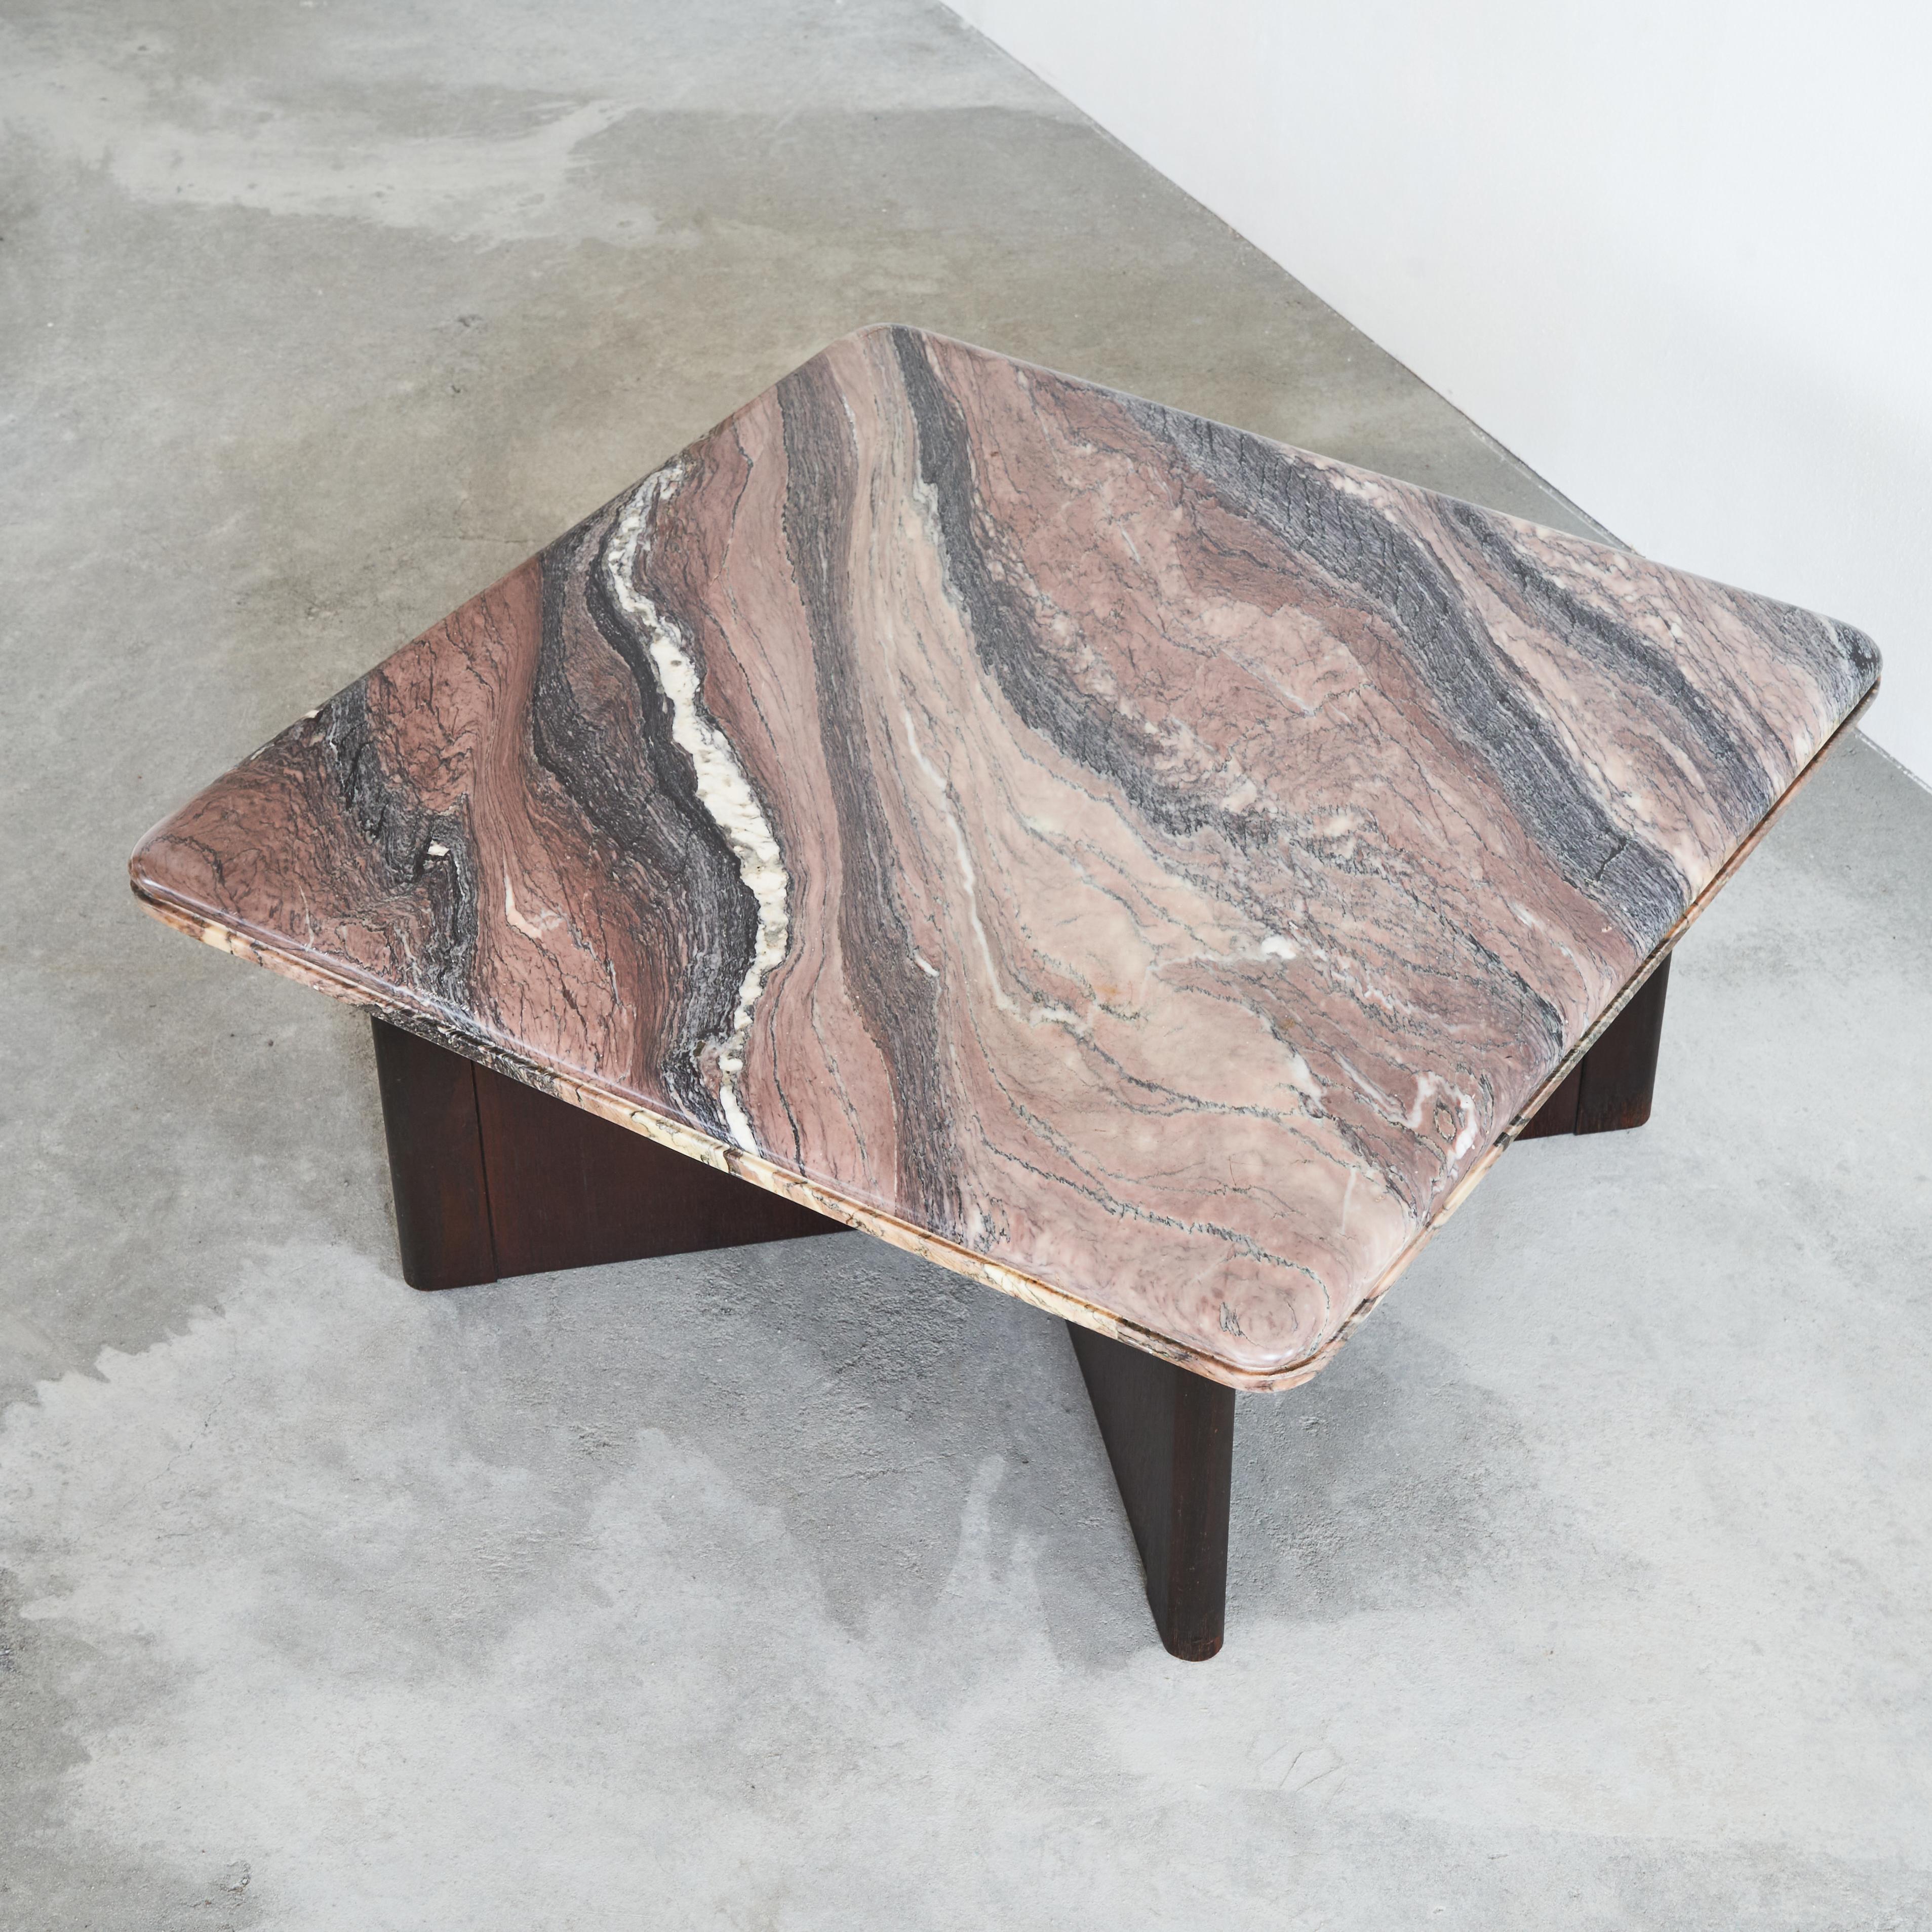 Coffee table in expressive marble and oak, 1970s.

This is a wonderful coffee table with a base in oak and a marble top. The marble features a very expressive and colorful vain and gives this table a very elegant and interesting look. The oak base